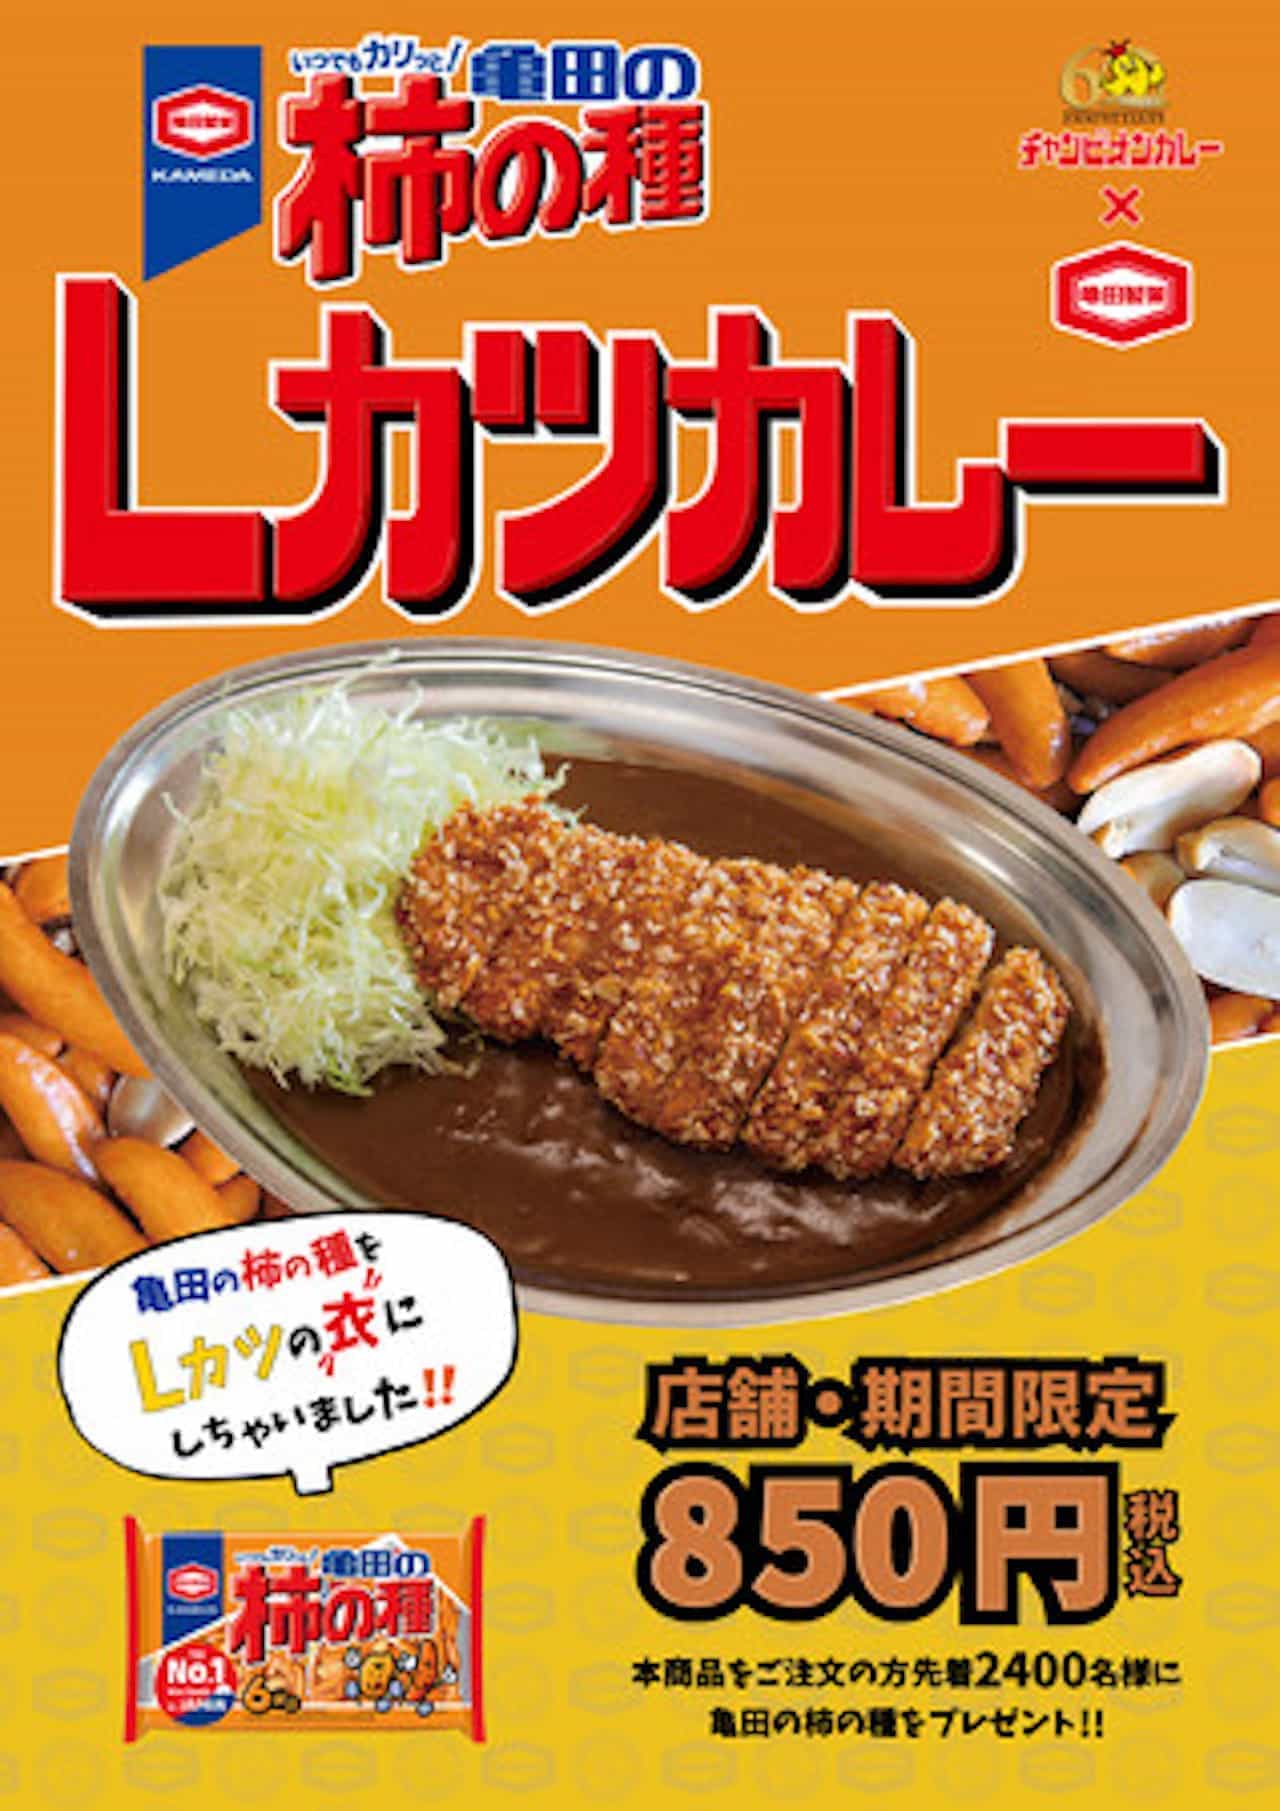 Champion curry "Kameda Kaki no Tane L cutlet curry" for a limited time